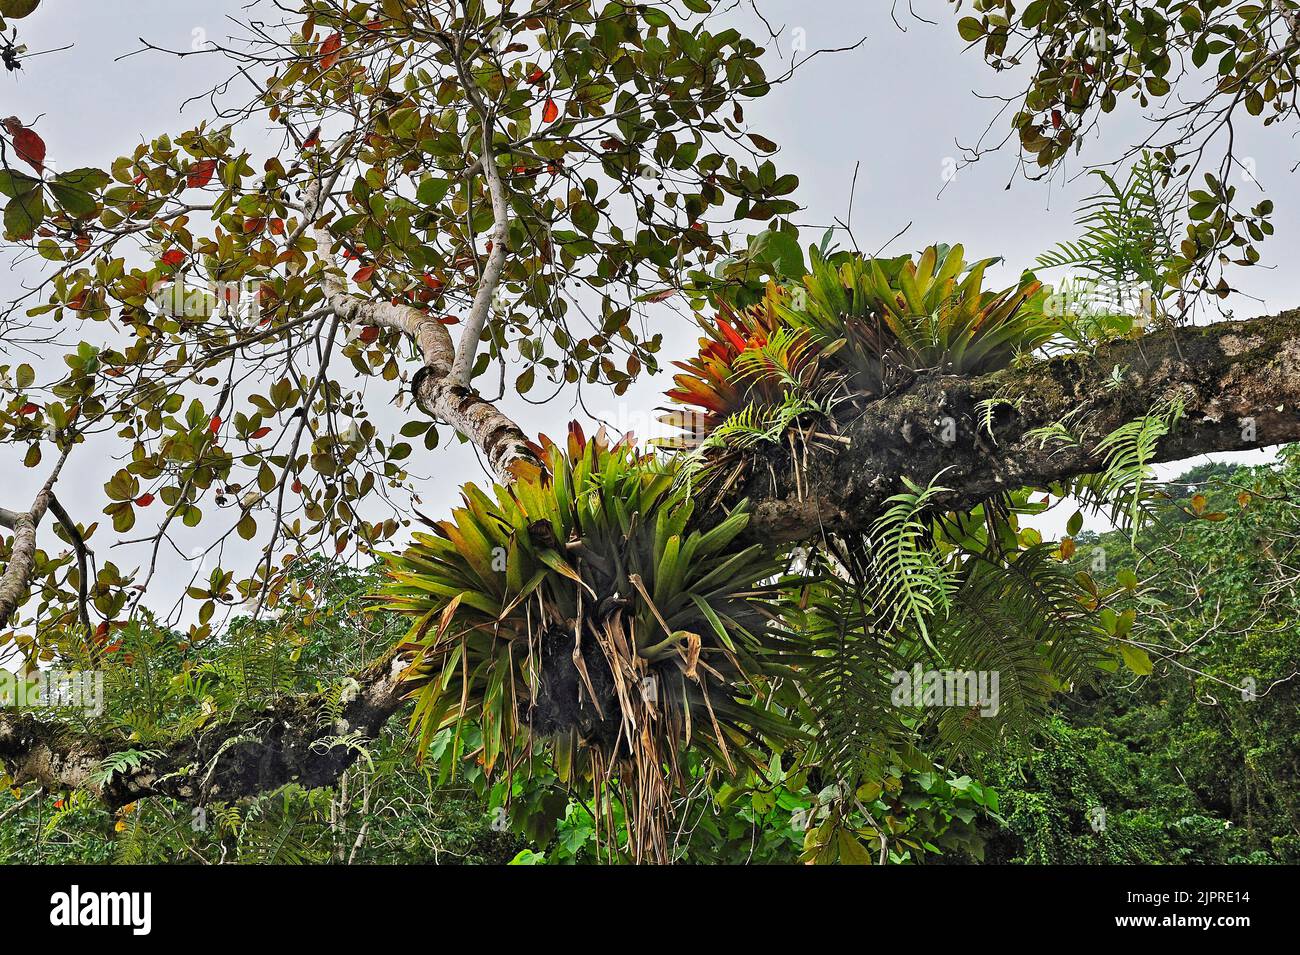 Epiphytes on tree branch, Cocos Island, UNESCO World Heritage Site, Costa Rica, Central America Stock Photo